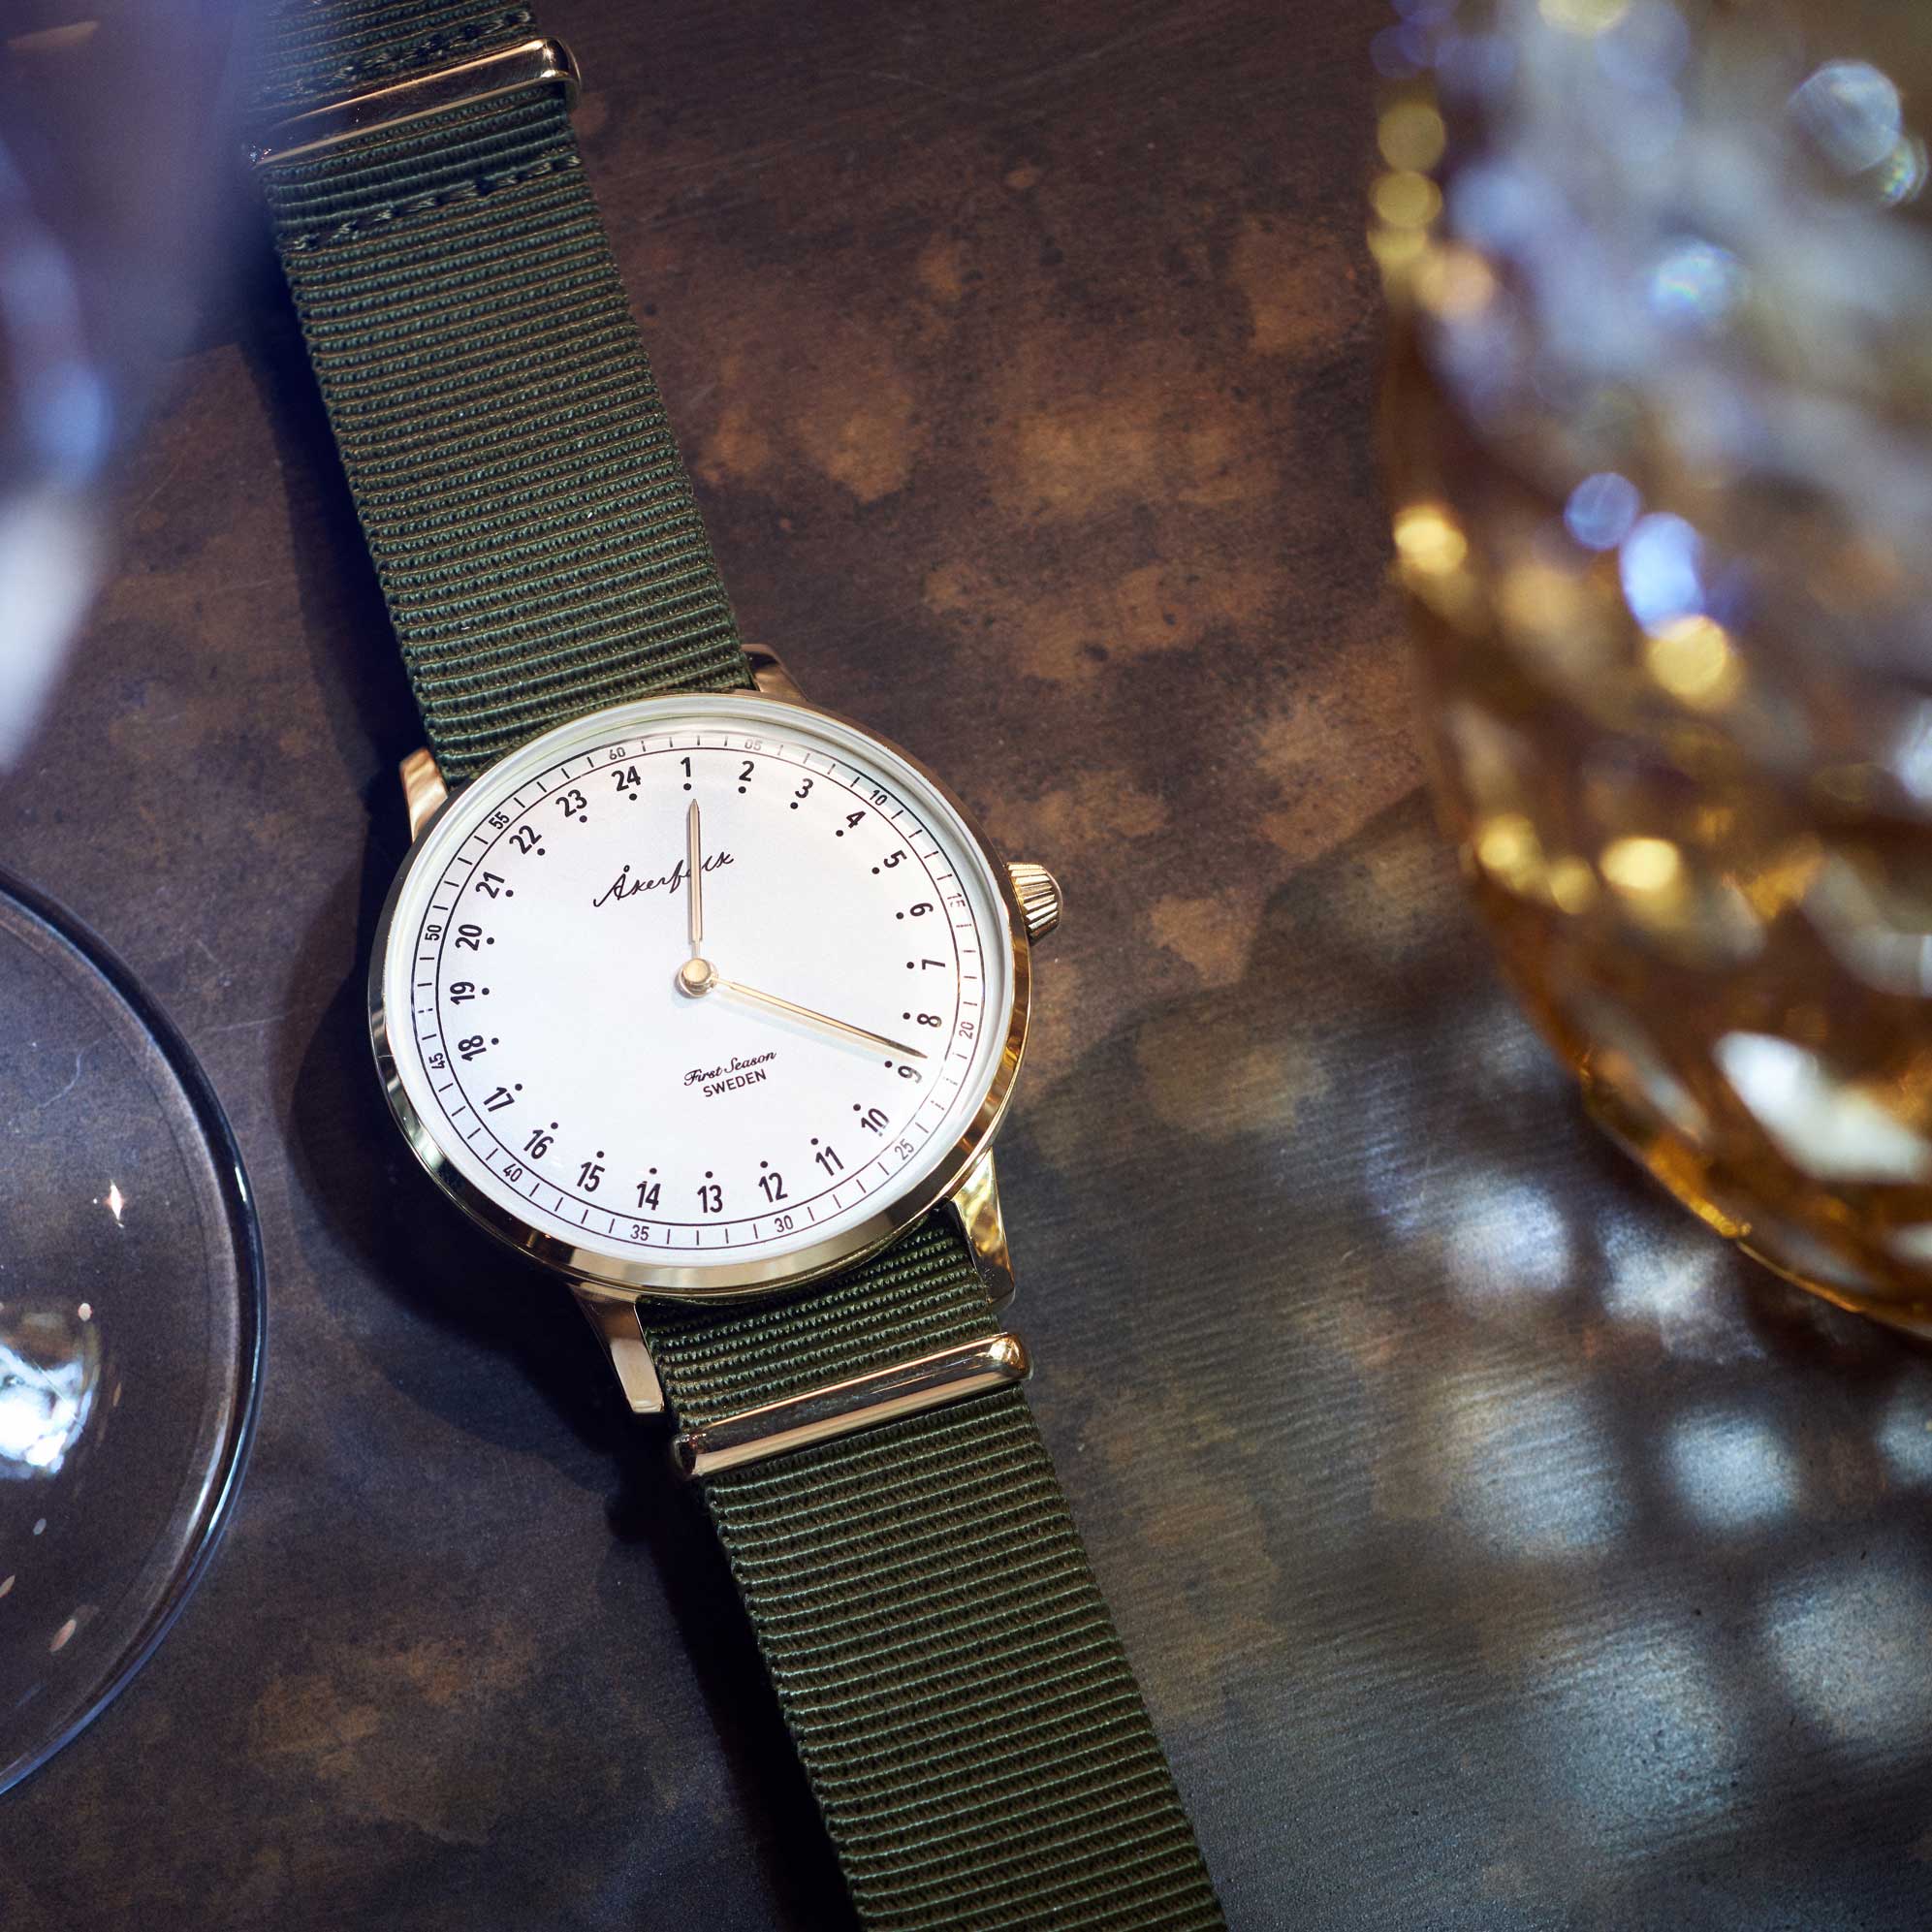 24-hour watch with gold case and green NATO strap